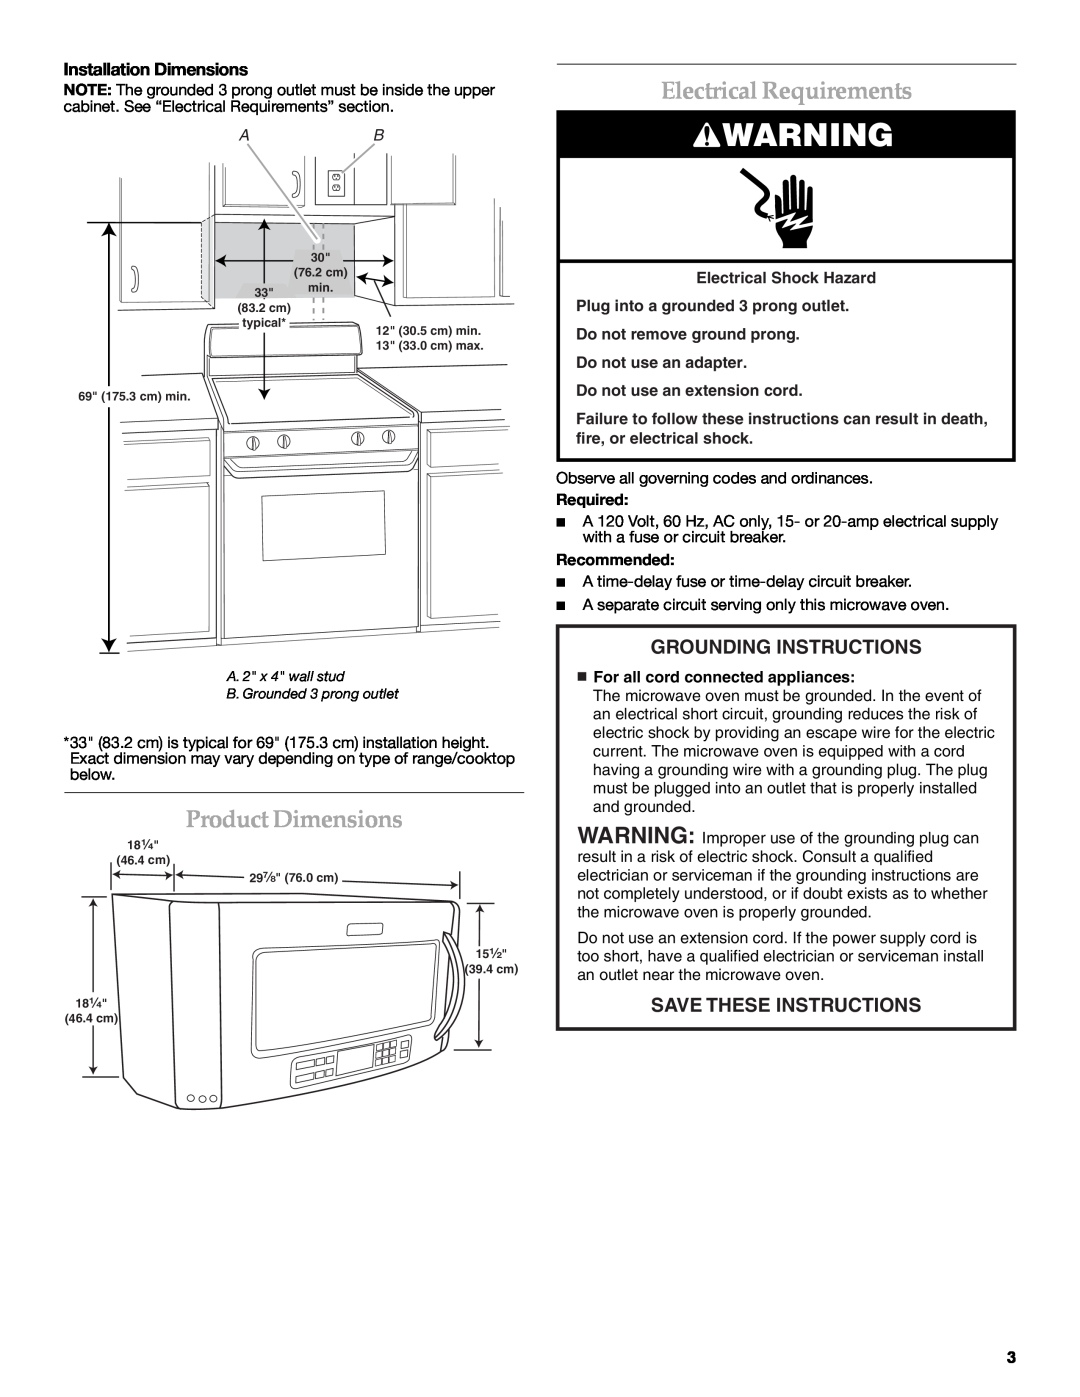 KitchenAid W10189714A Product Dimensions, Electrical Requirements, Installation Dimensions, Do not use an extension cord 